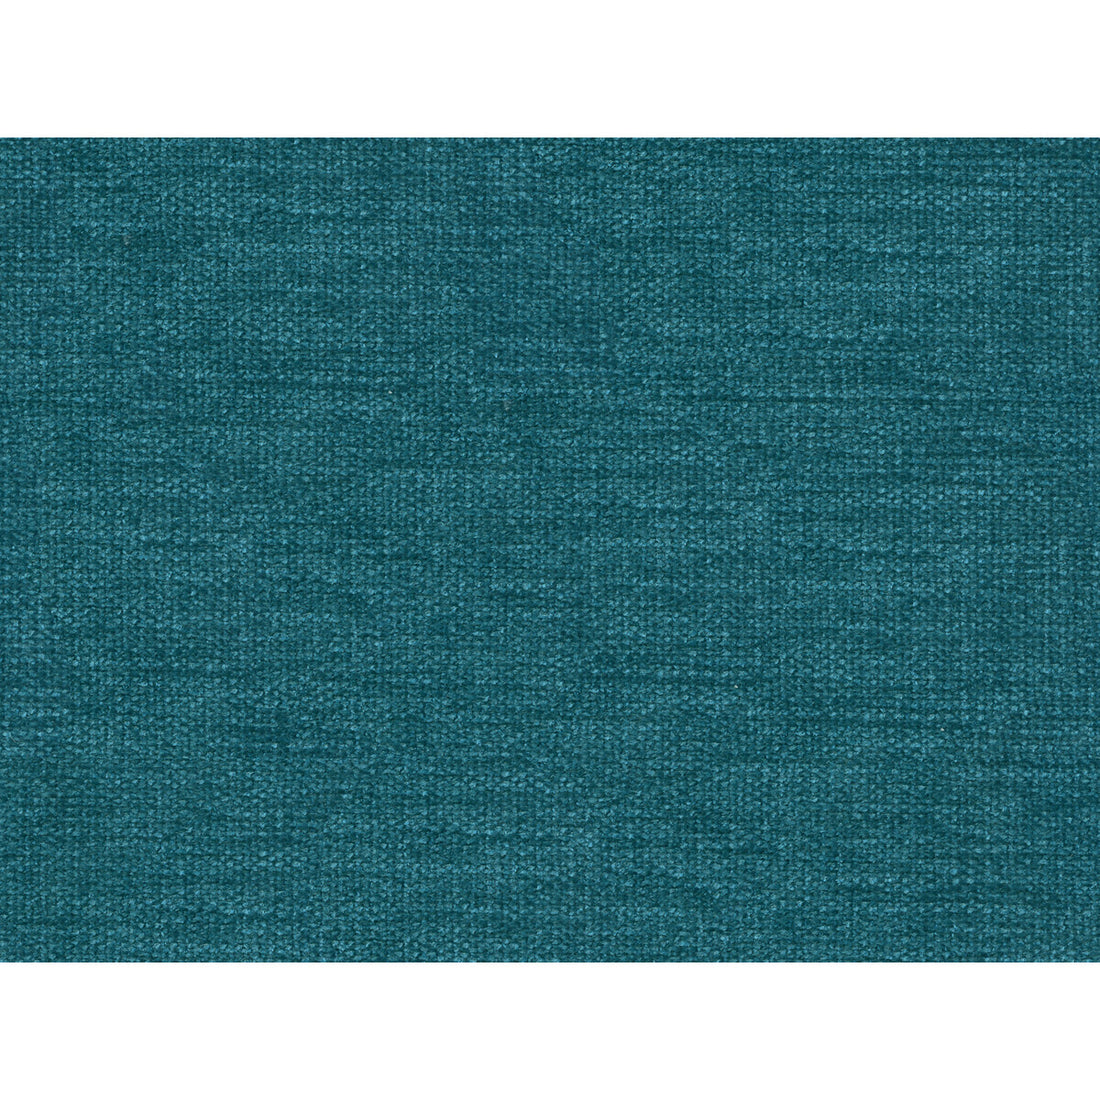 Kravet Contract fabric in 34961-131 color - pattern 34961.131.0 - by Kravet Contract in the Performance Kravetarmor collection